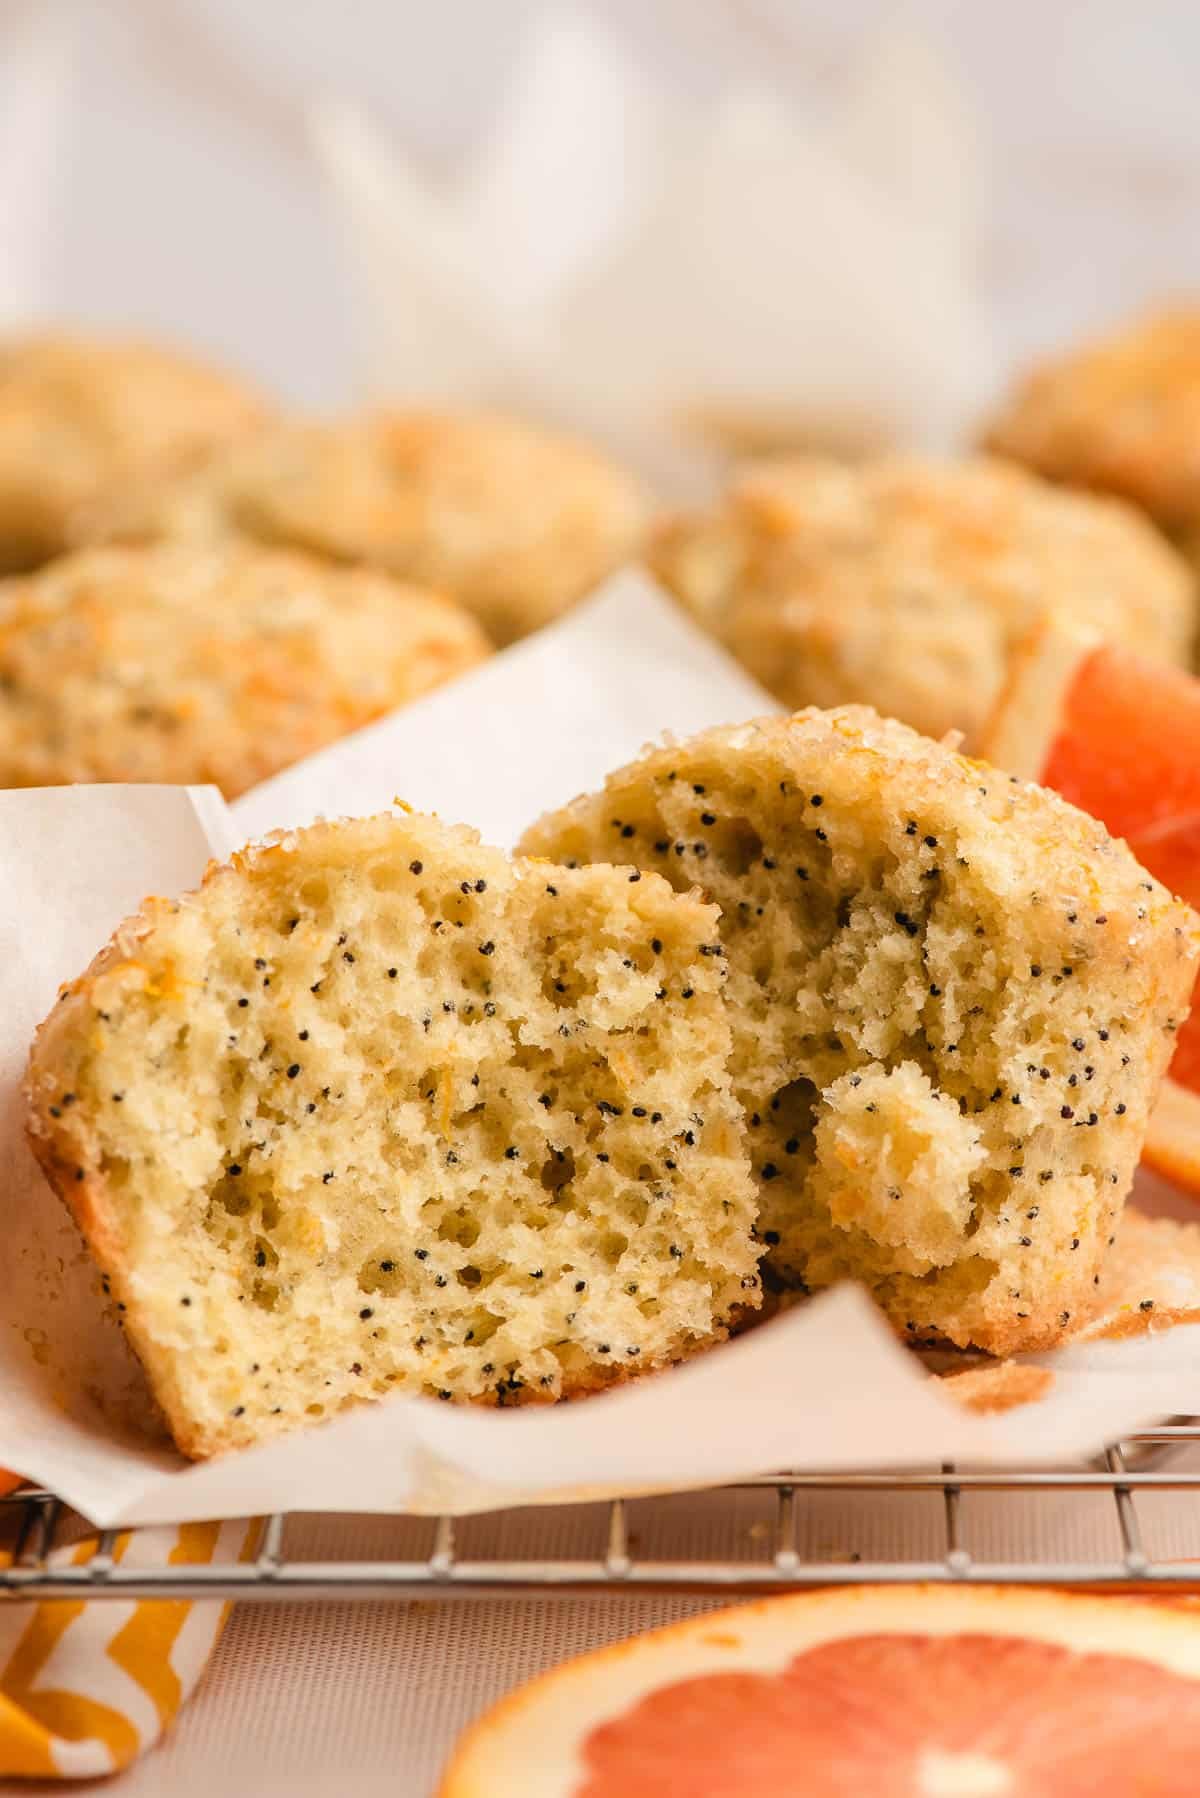 An orange and poppy seed muffin broken in half to show the fluffy interior.